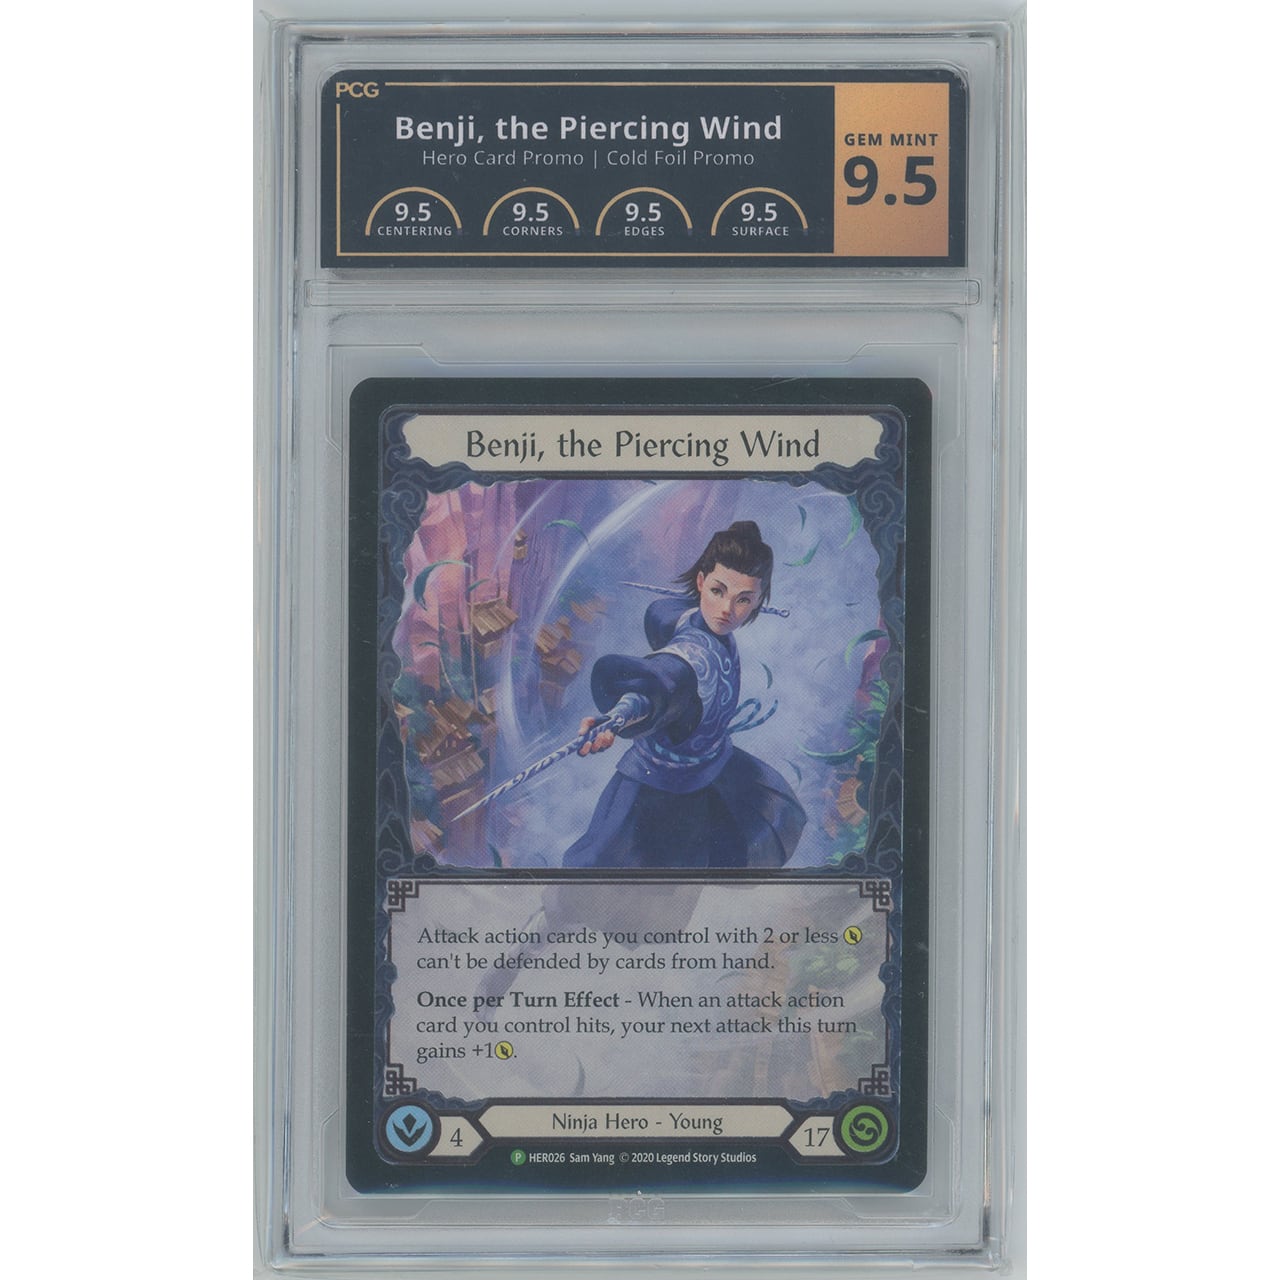 【PCG9.5】Benji,the Piercing Wind (Cold Foil P)